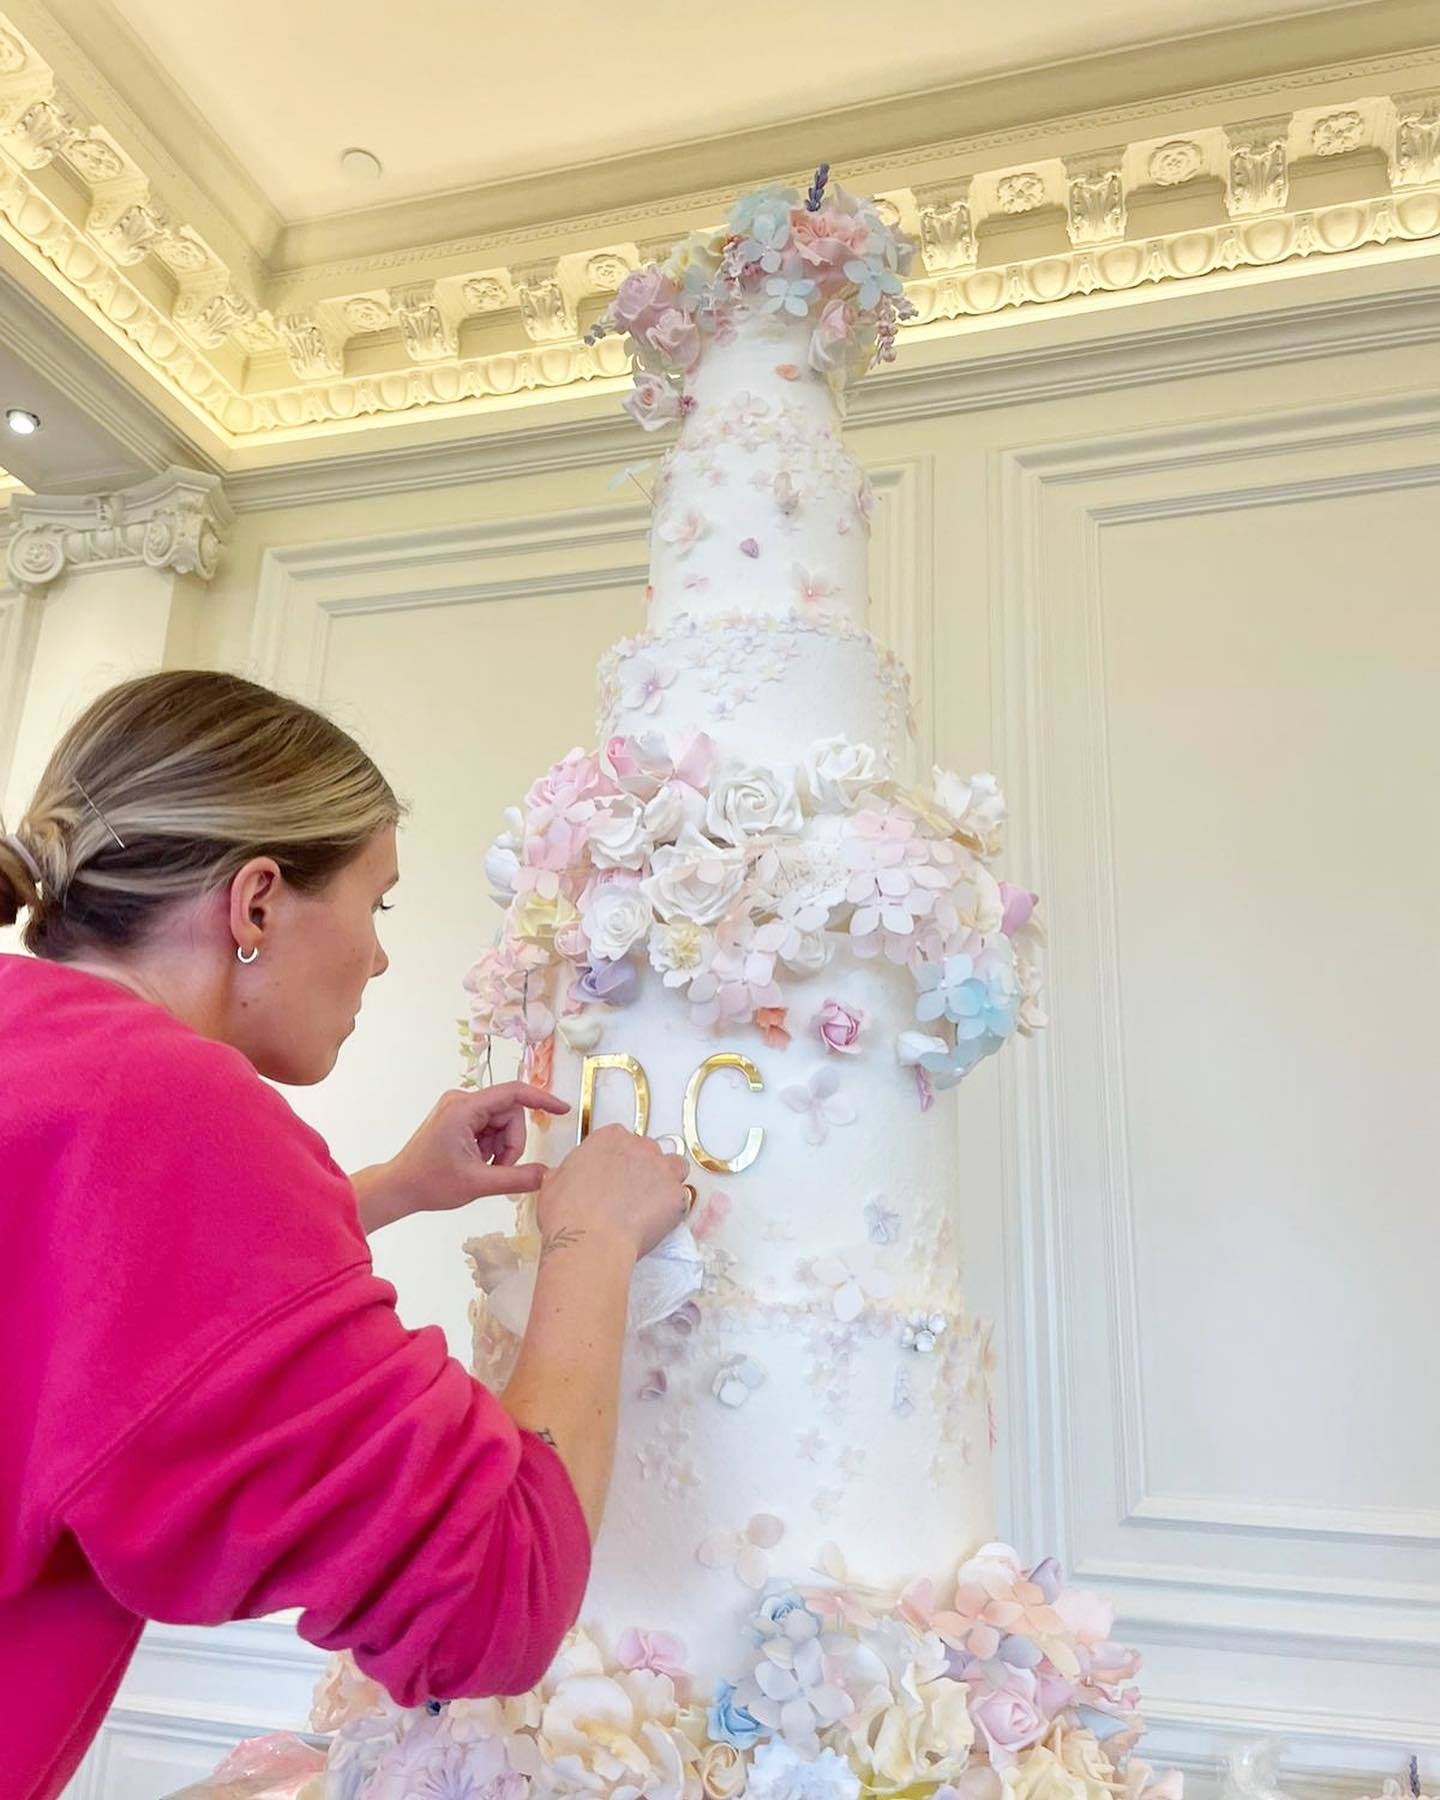 The East End baker says this is her largest creation to date.